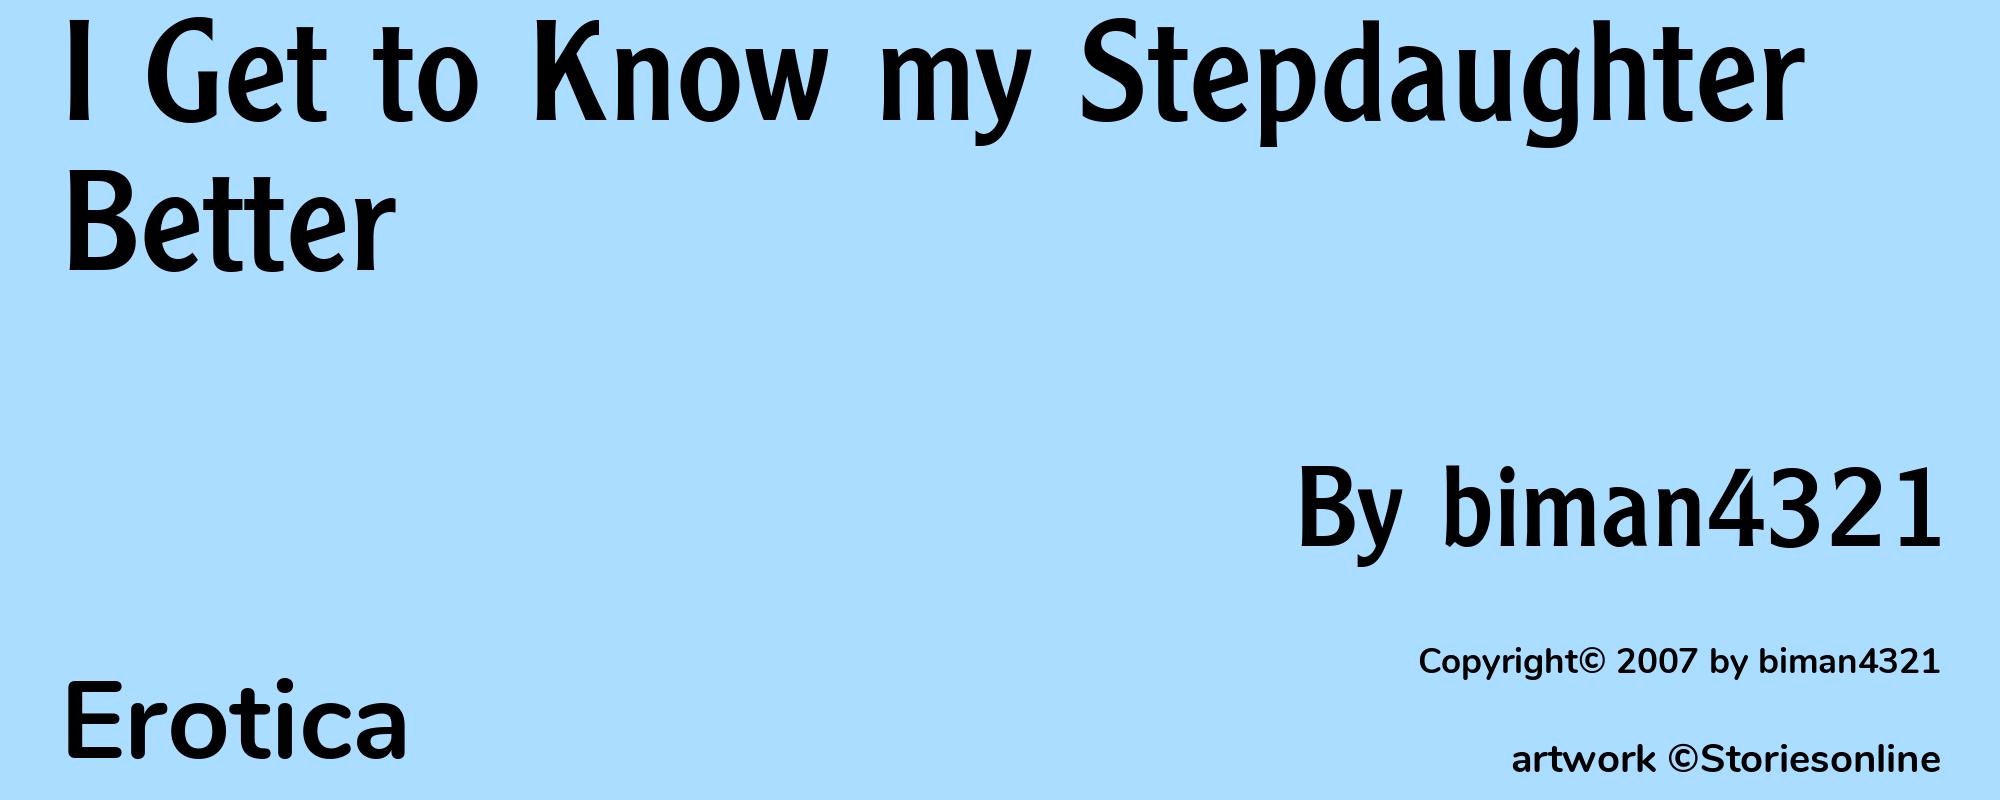 I Get to Know my Stepdaughter Better - Cover